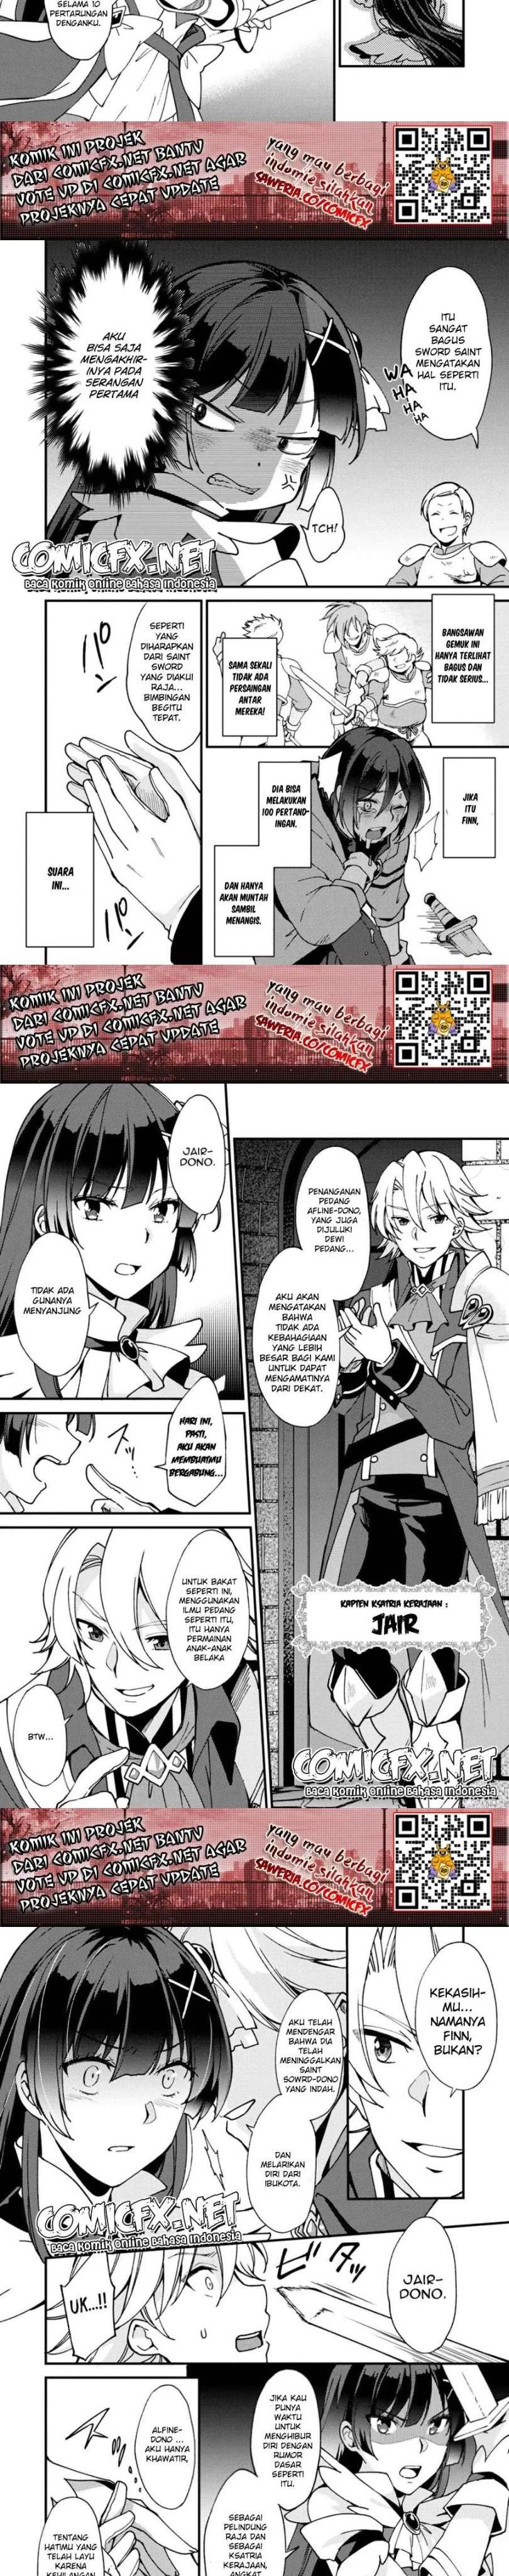 A Sword Master Childhood Friend Power Harassed Me Harshly, So I Broke off Our Relationship and Make a Fresh Start at the Frontier as a Magic Swordsman Chapter 05.2